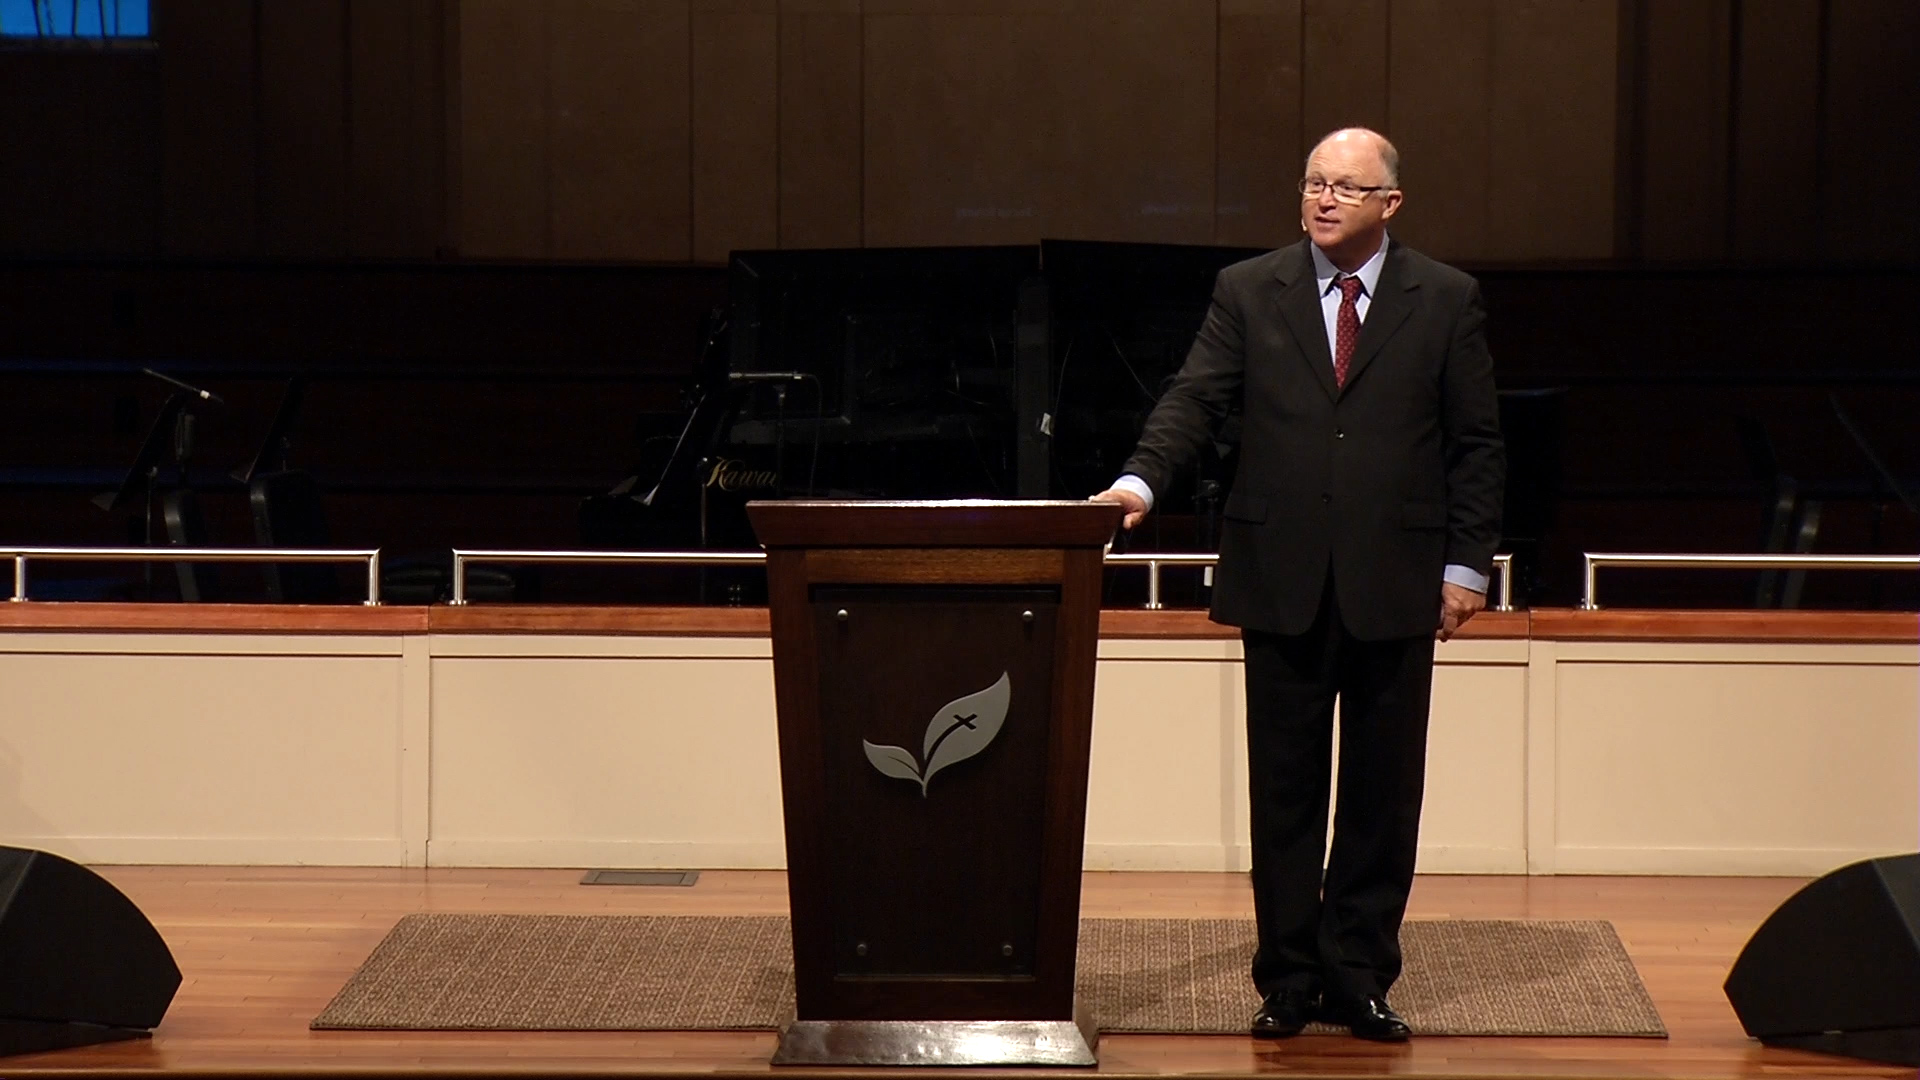 Pastor Paul Chappell: Serving with Assurance